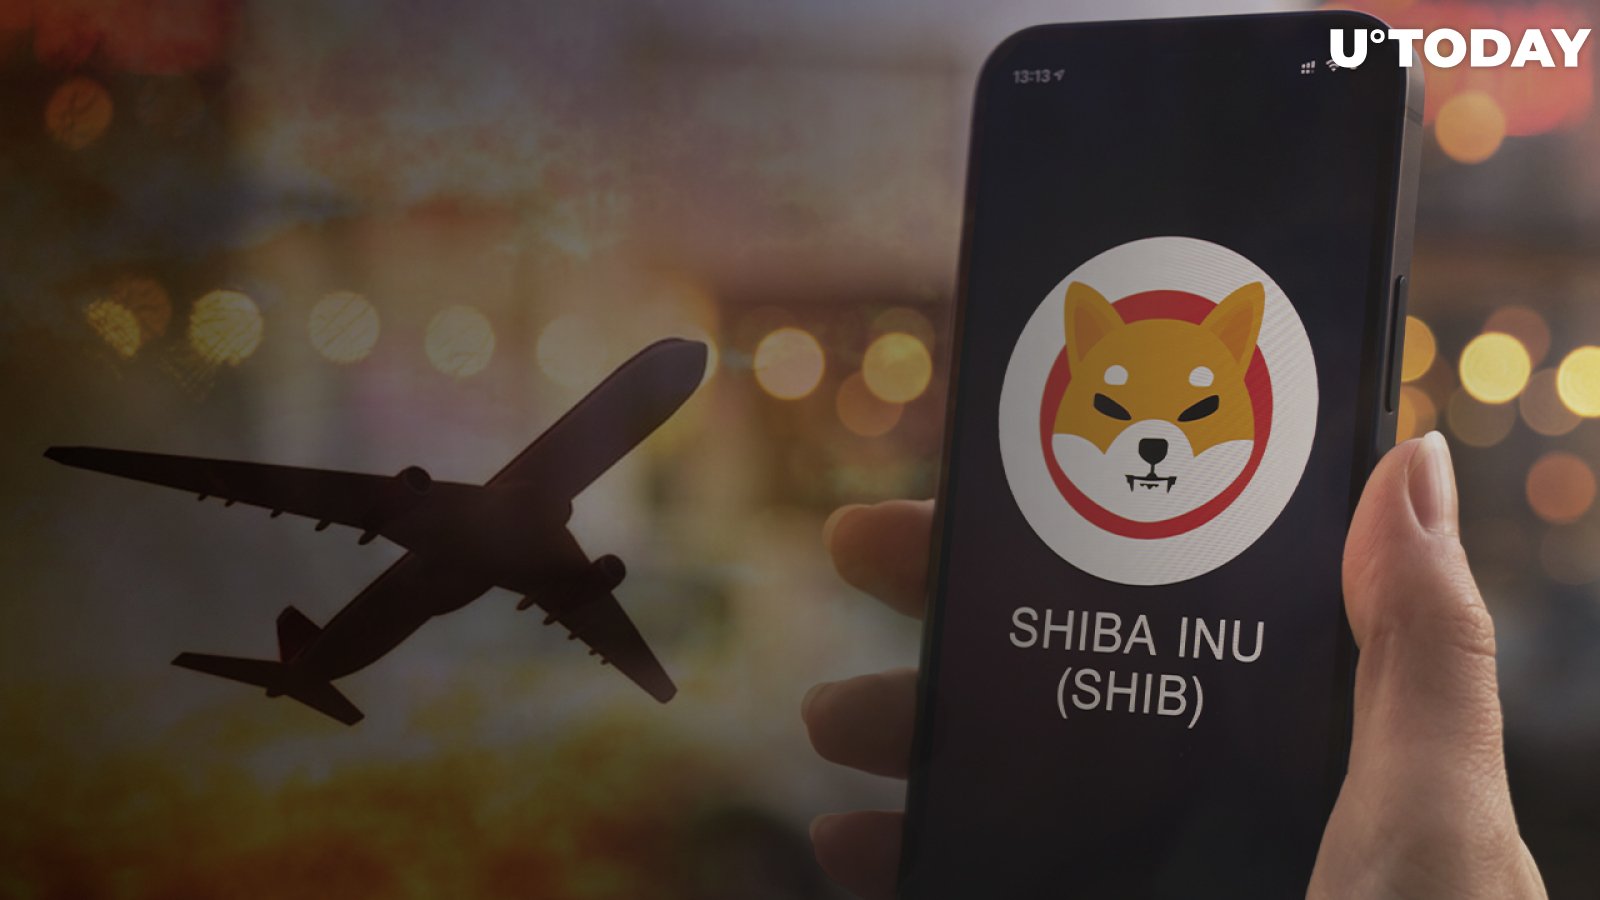 SHIB Can Now Be Used to Pay for Flights and Hotels via This New Partnership